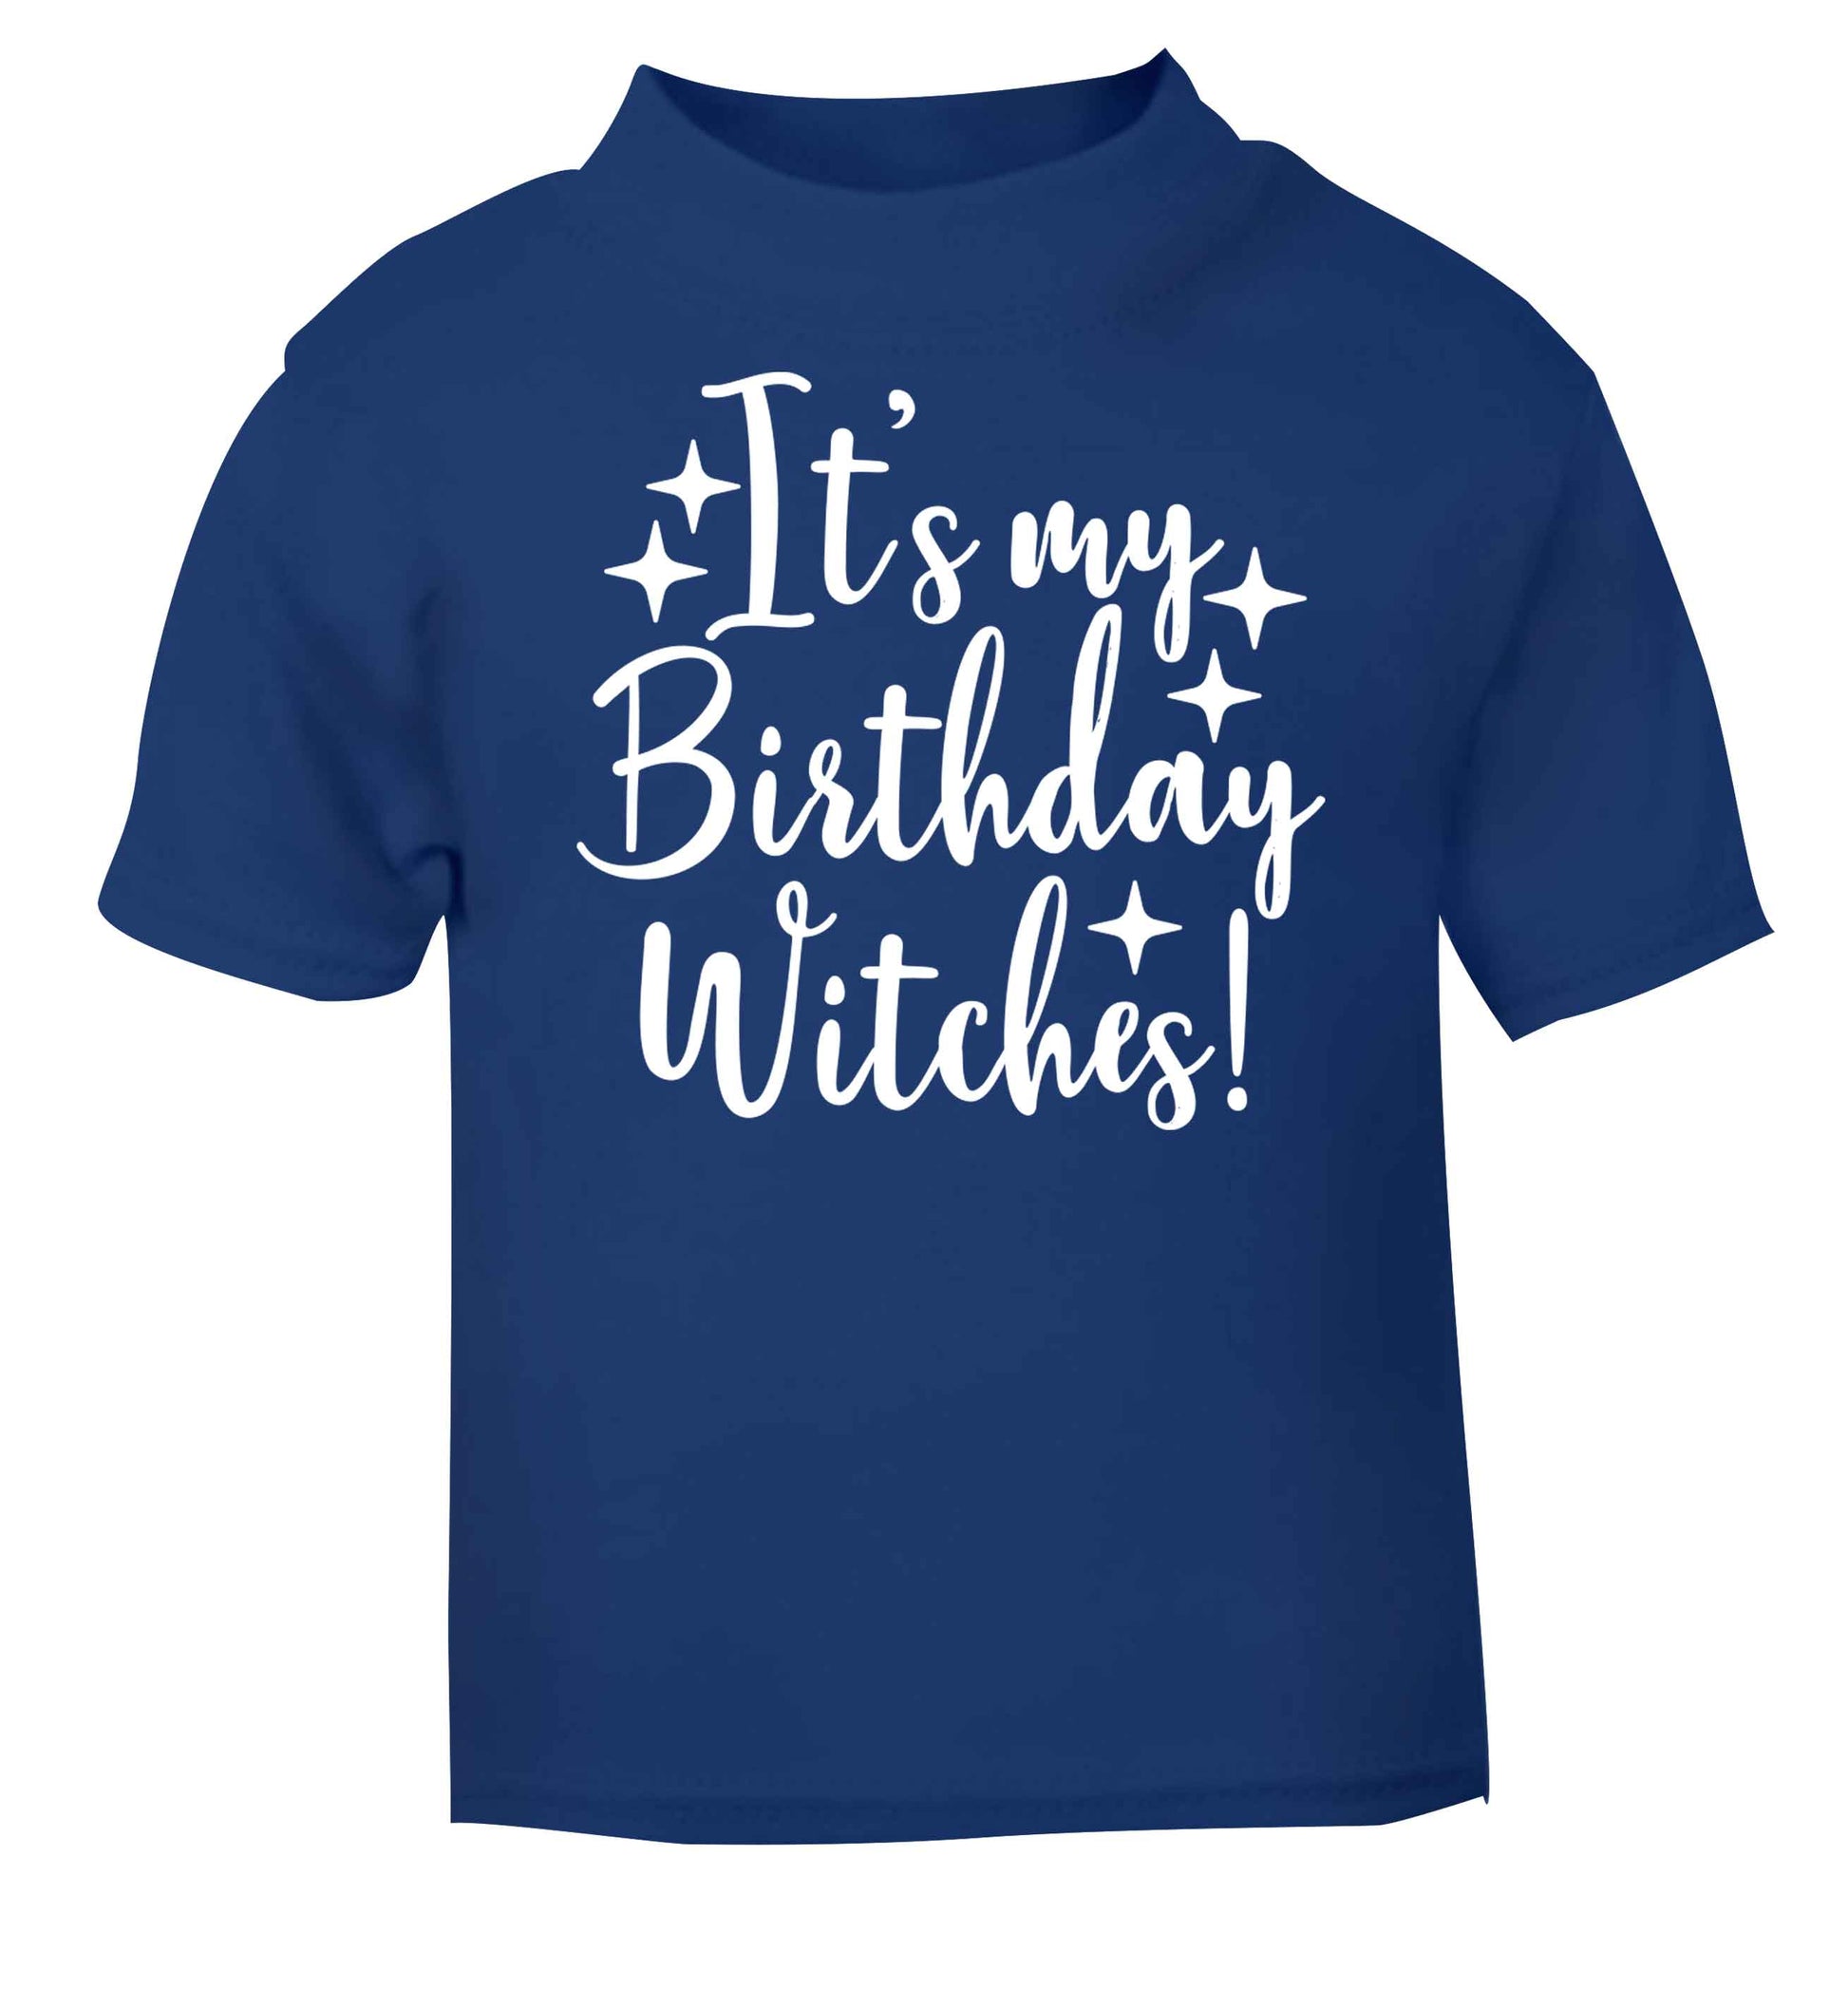 It's my birthday witches!blue baby toddler Tshirt 2 Years